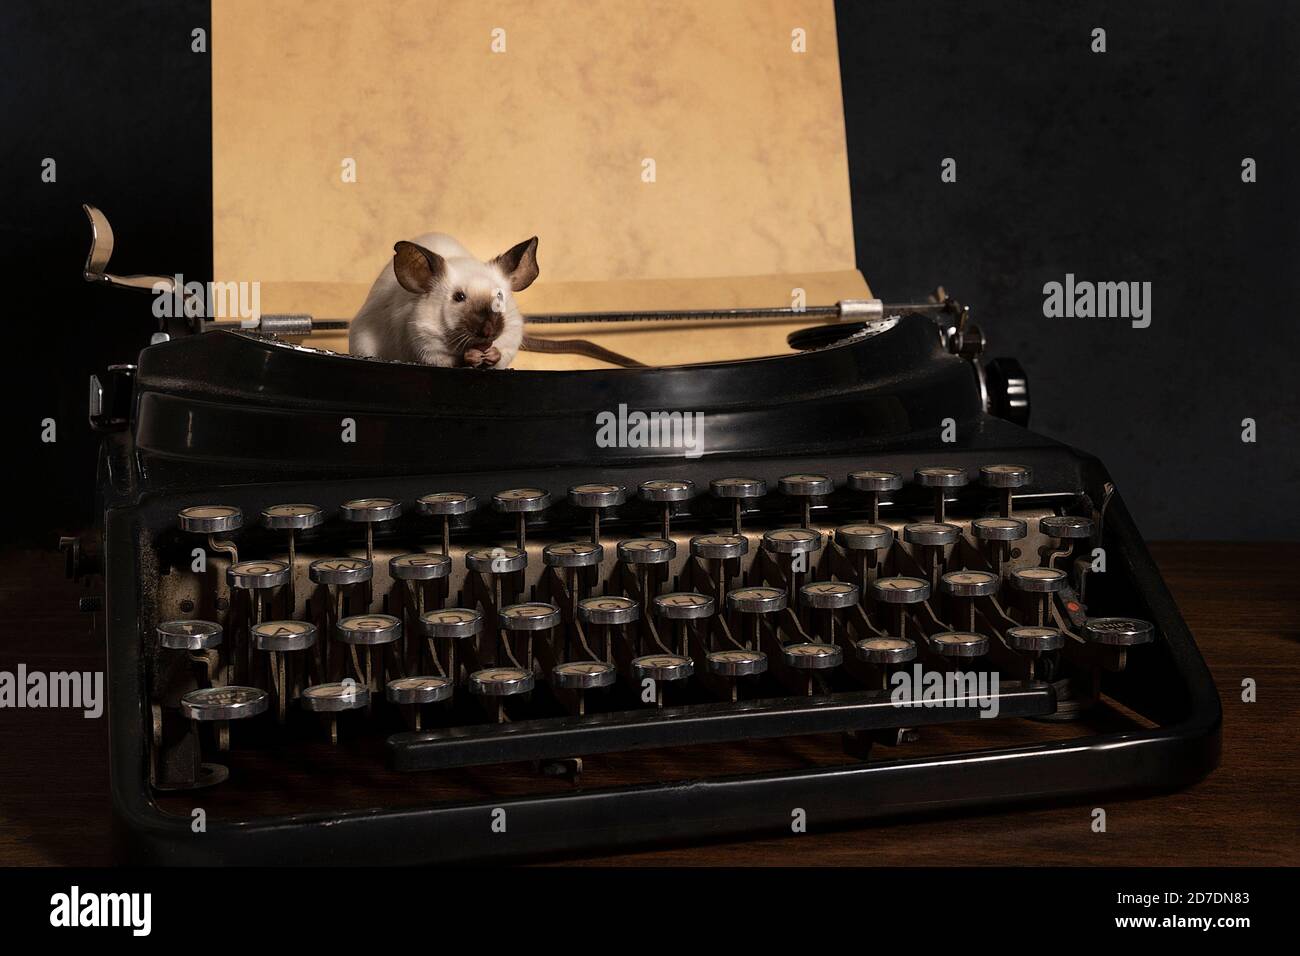 A Still life with siamese mice on a typewriter and phone making contact and communicating Stock Photo